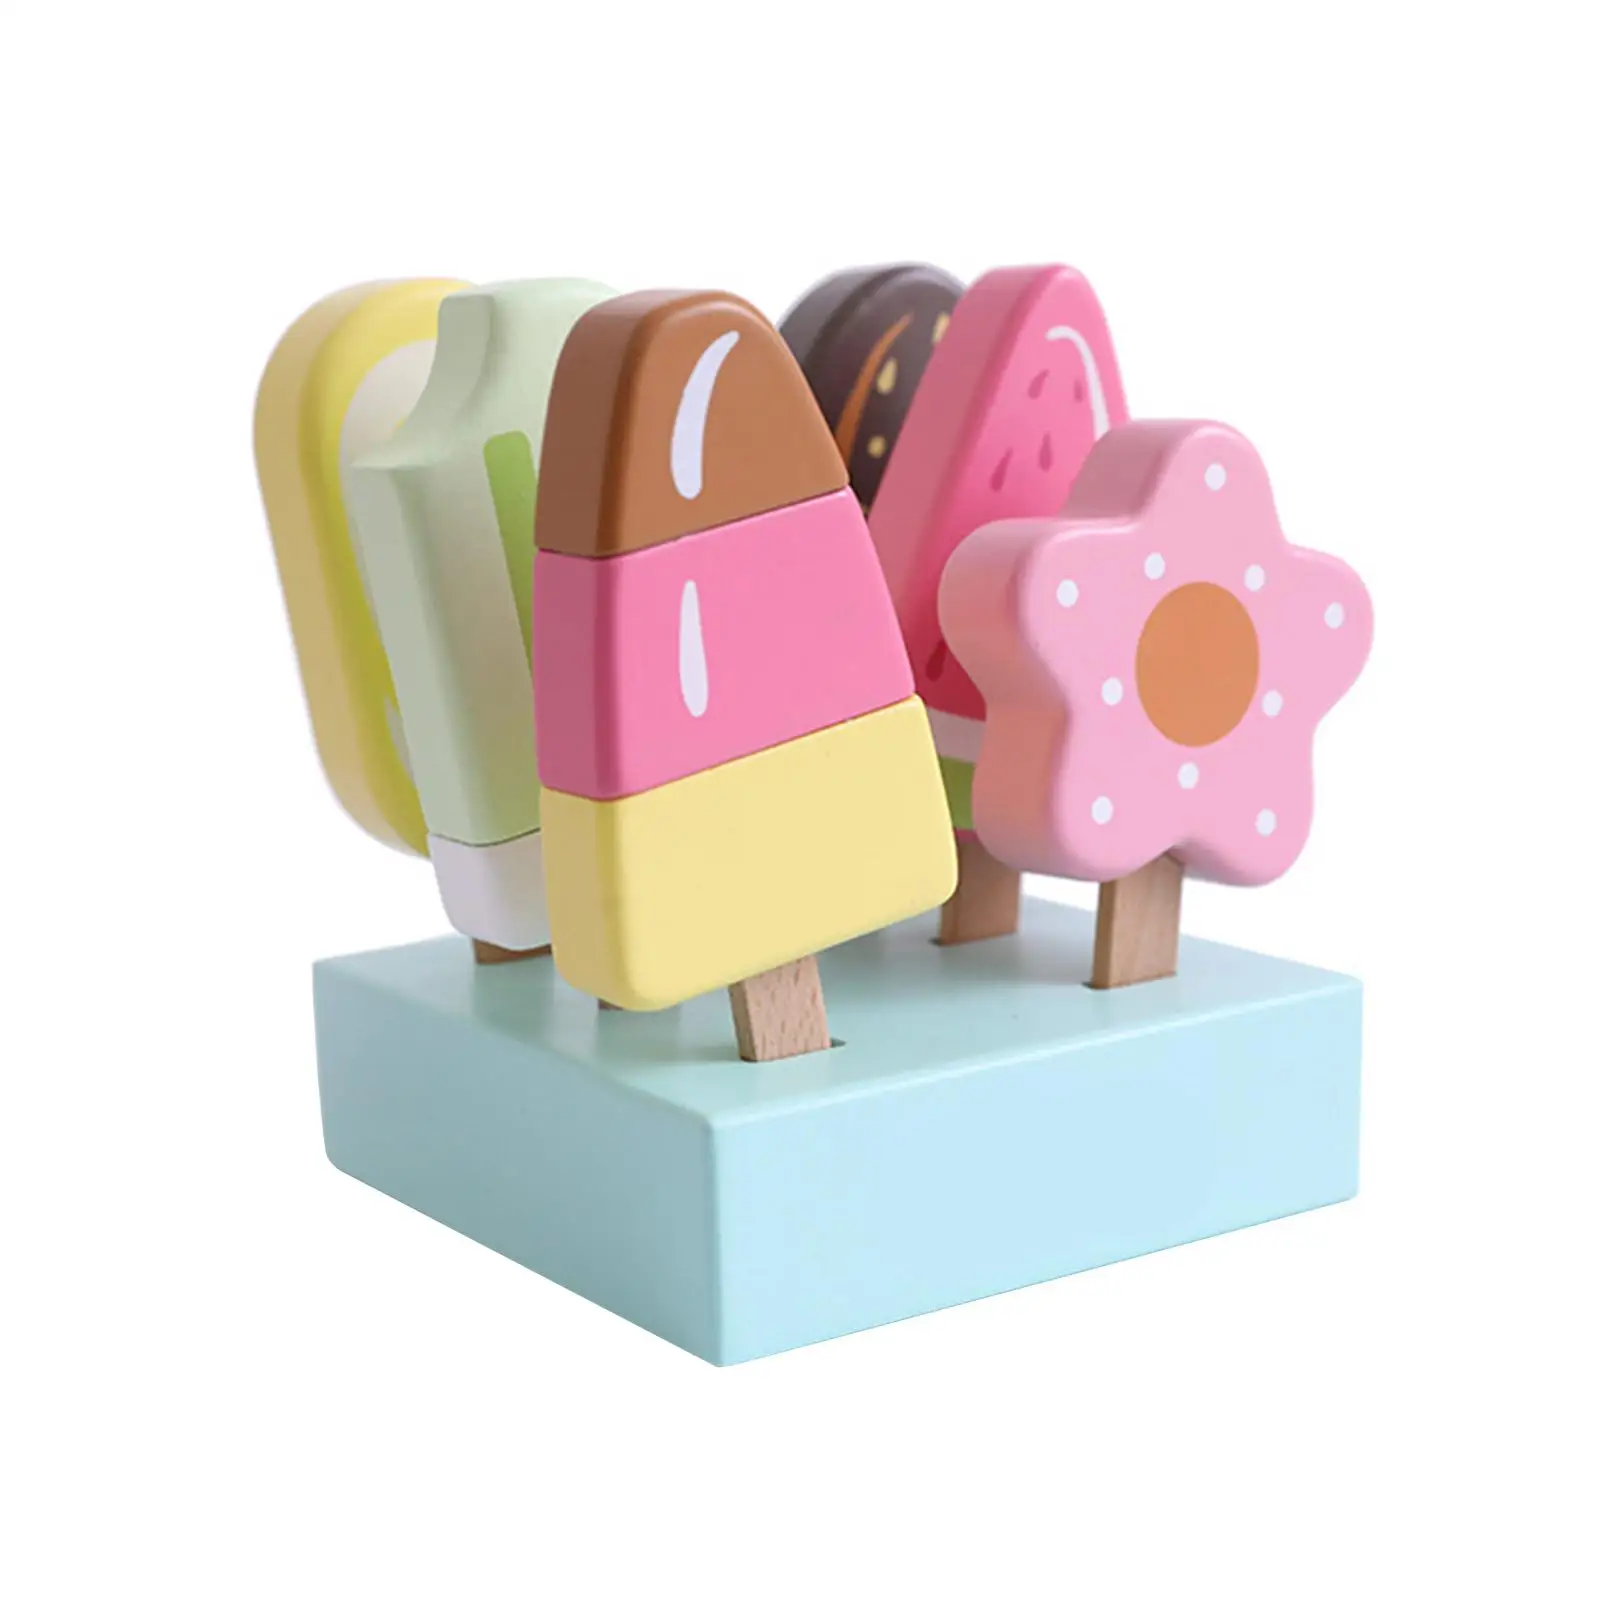 Ice Cream Toy, Fake Ice Cream with Wooden Popsicle, Montessori Simulation Ice Cream Pretend Play for Kids Boys Holiday Gifts